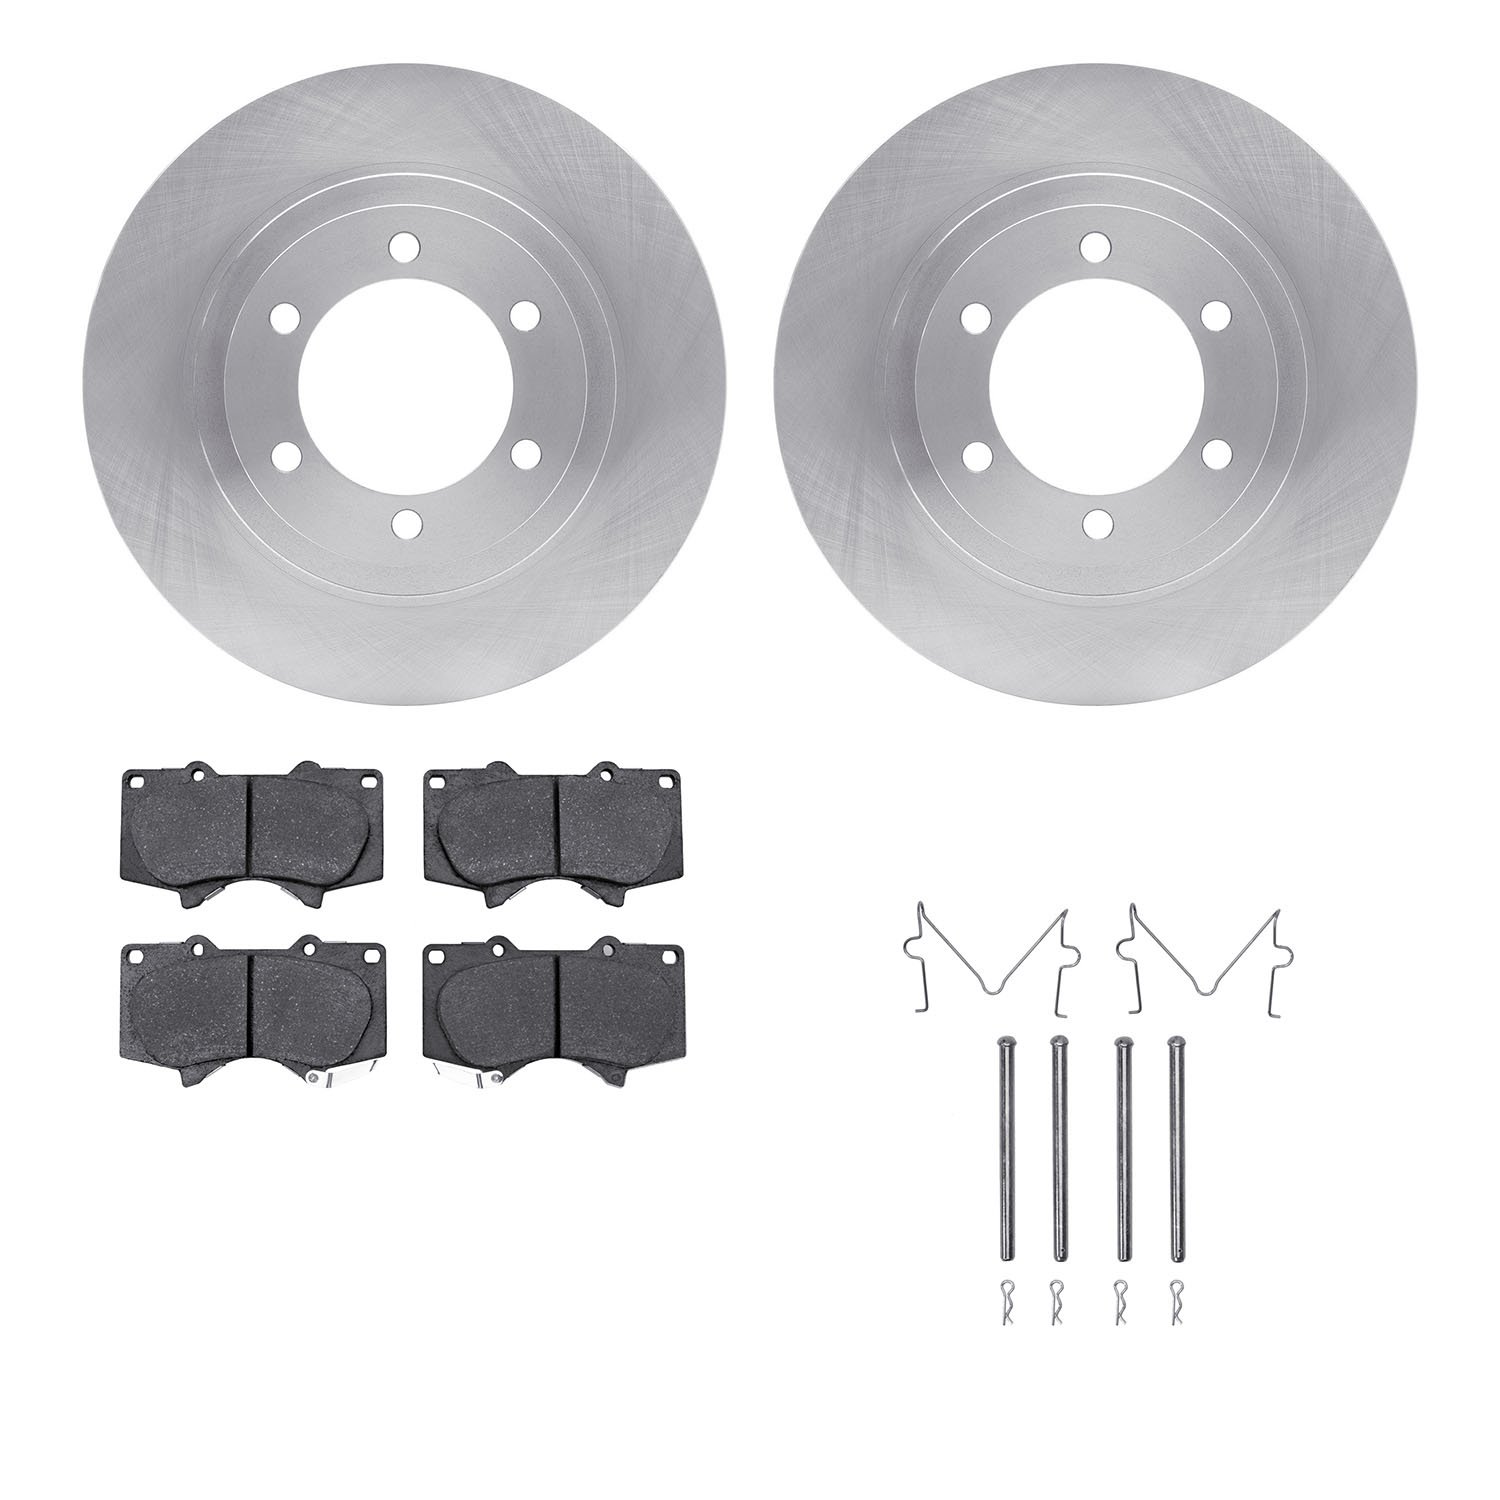 6412-76043 Brake Rotors with Ultimate-Duty Brake Pads Kit & Hardware, 2003-2009 Lexus/Toyota/Scion, Position: Front